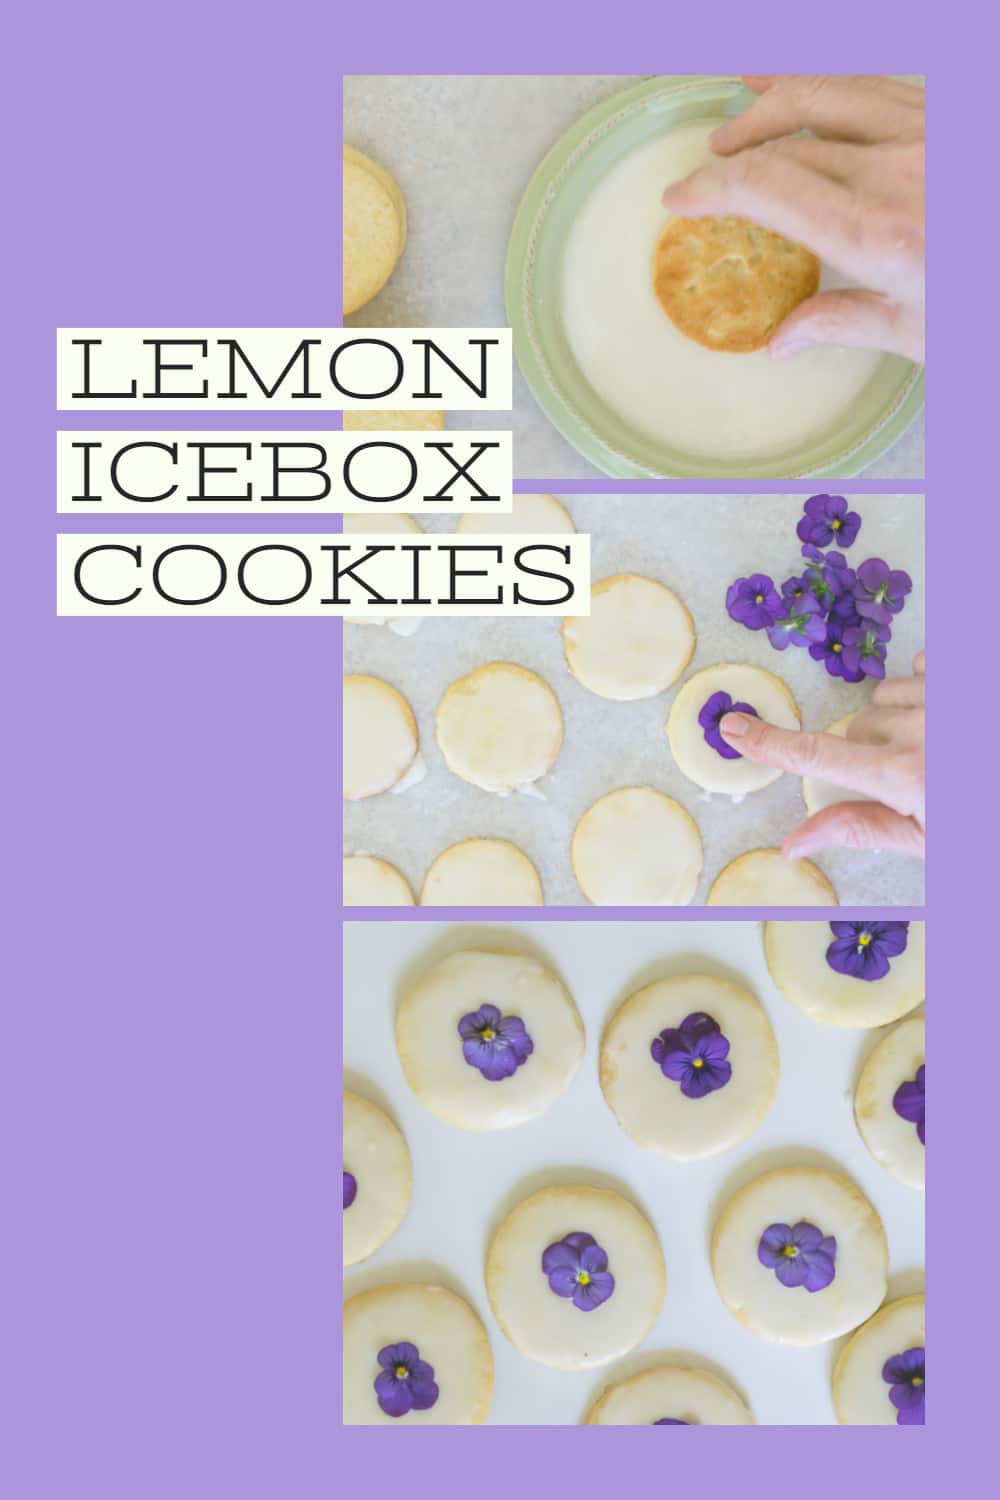 pin showing lemon icebox cookies being dipped in glaze and then having a pansy placed in wet glaze.